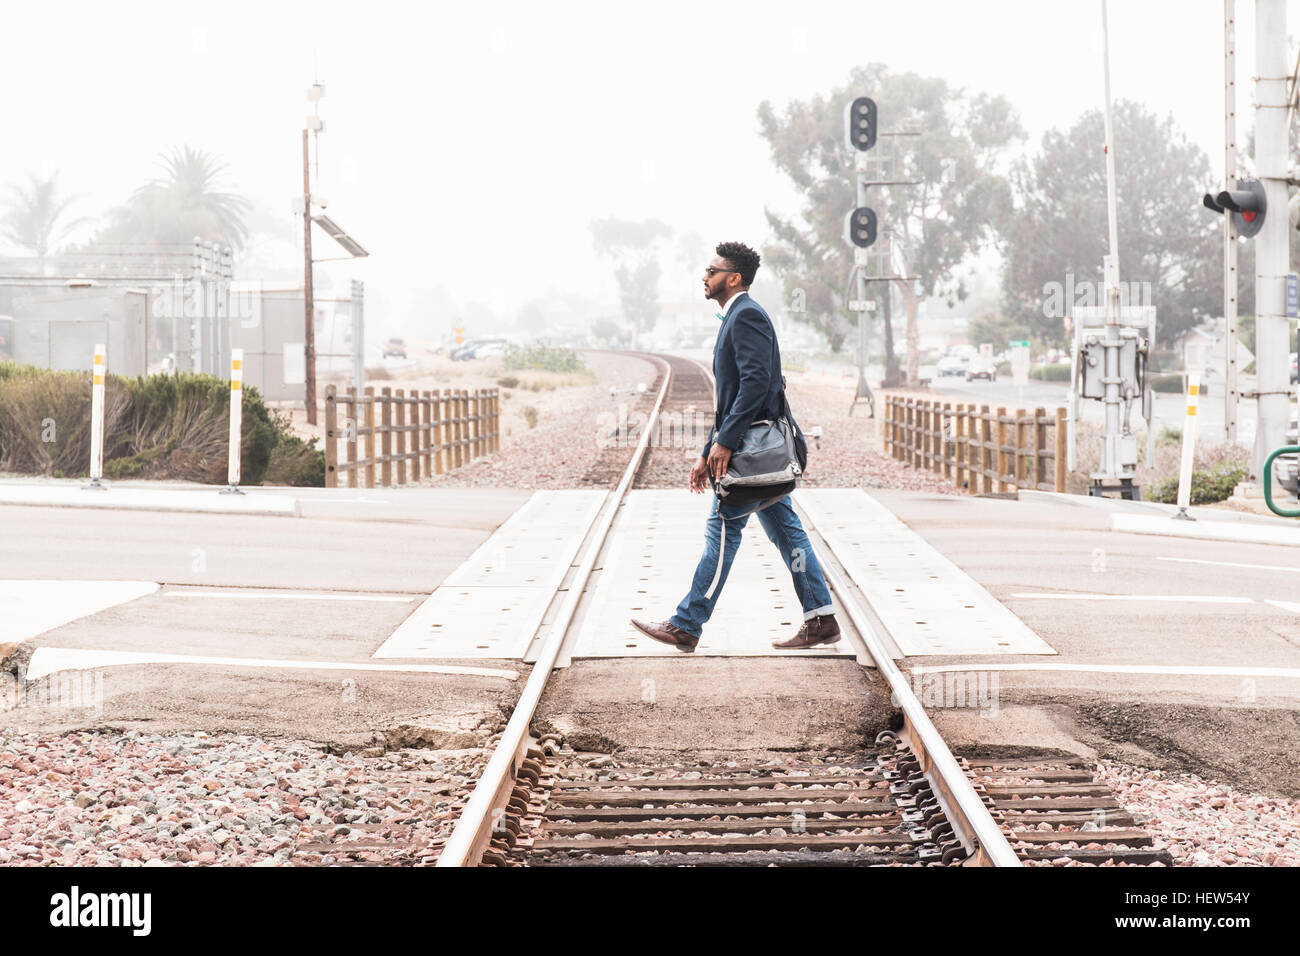 Young man walking across level crossing, side view Stock Photo